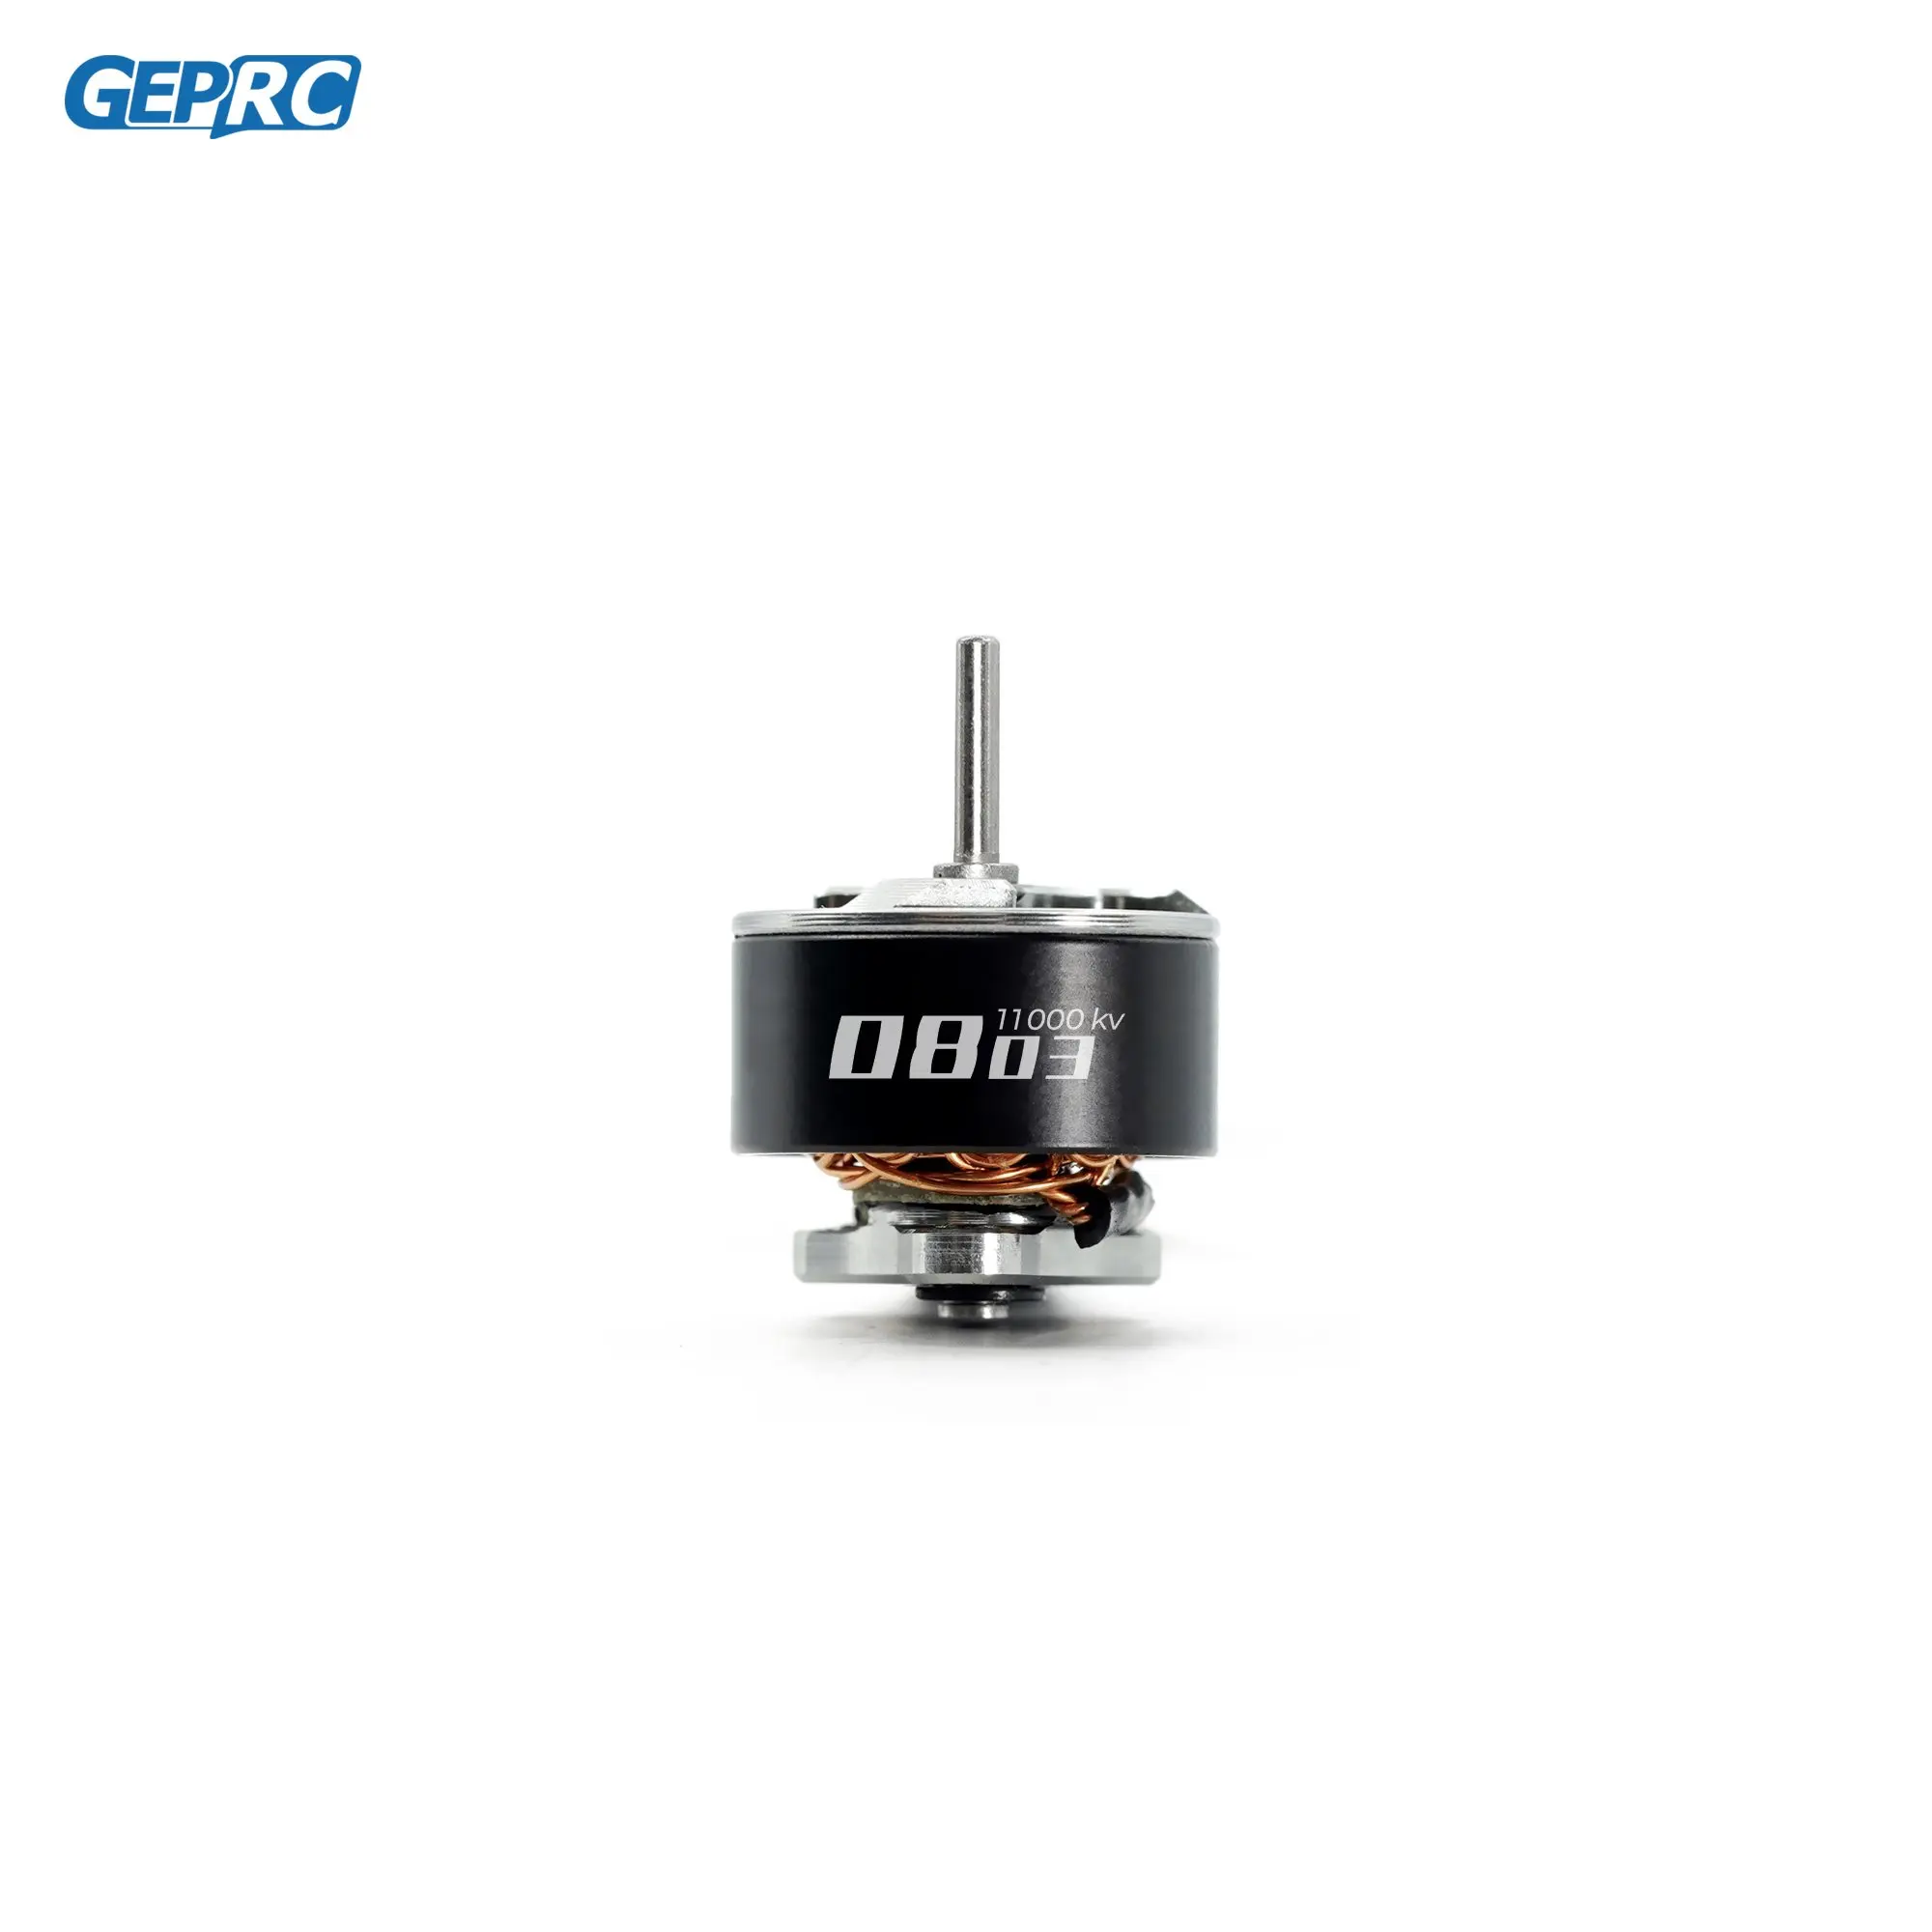 GEPRC SPEEDX2 0803 Brushless Motor 11000KV Suitable For DIY RC FPV Quadcopter Tiny / Whoop Drone Accessories Replacement Parts 1